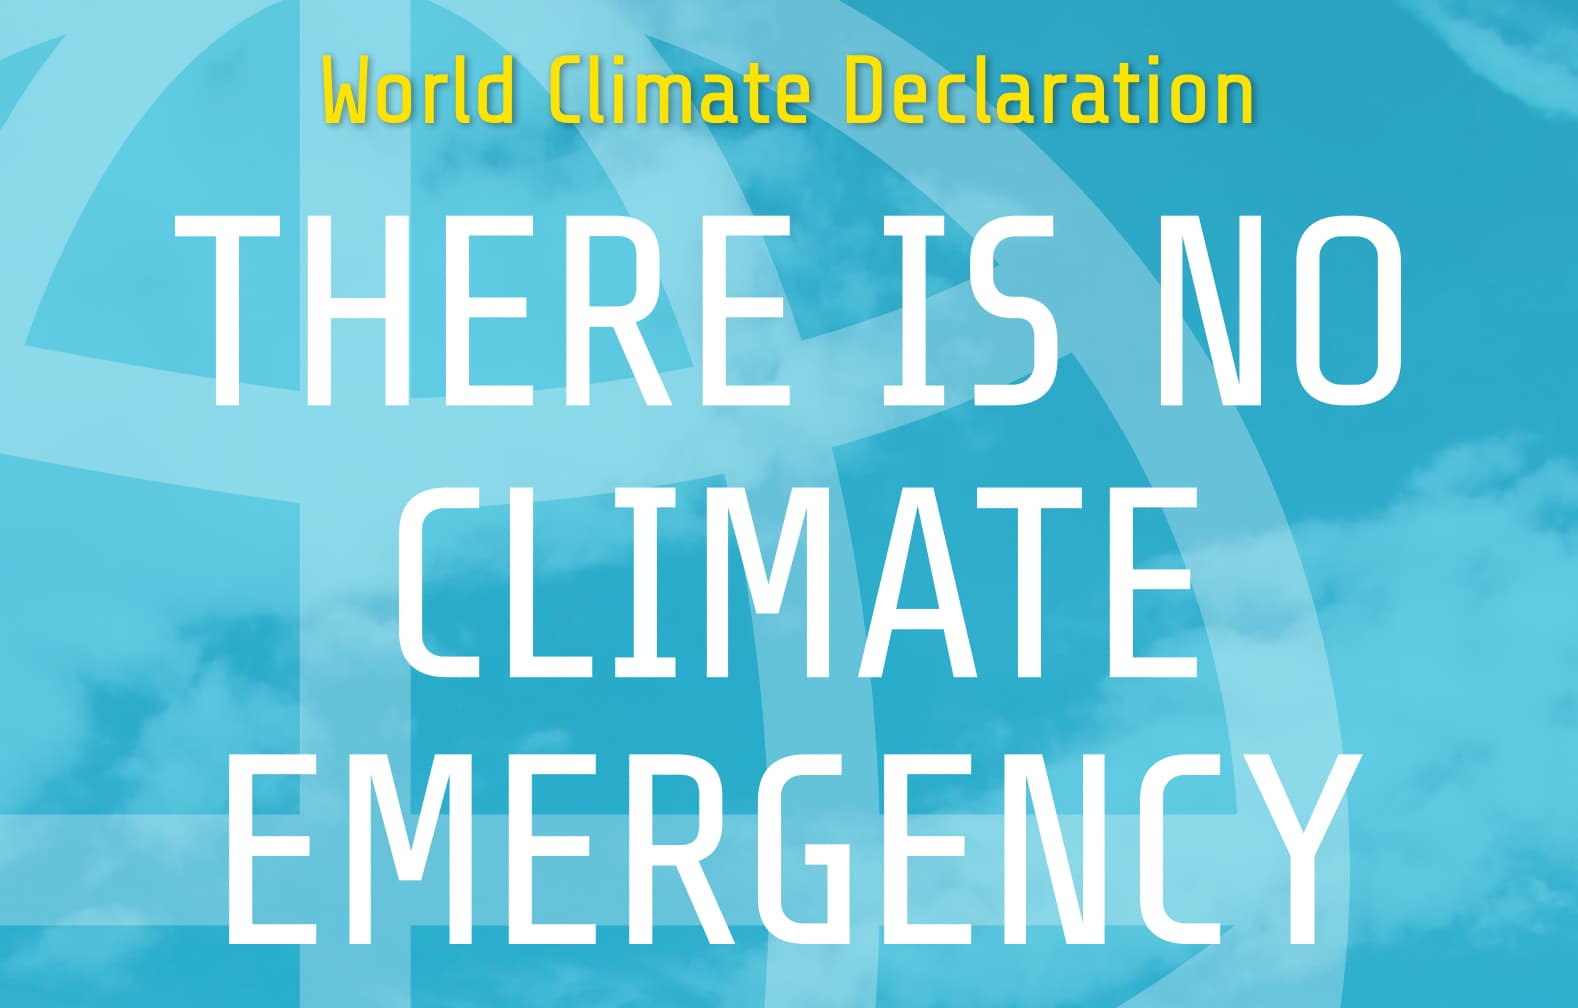 There is no climate emergency